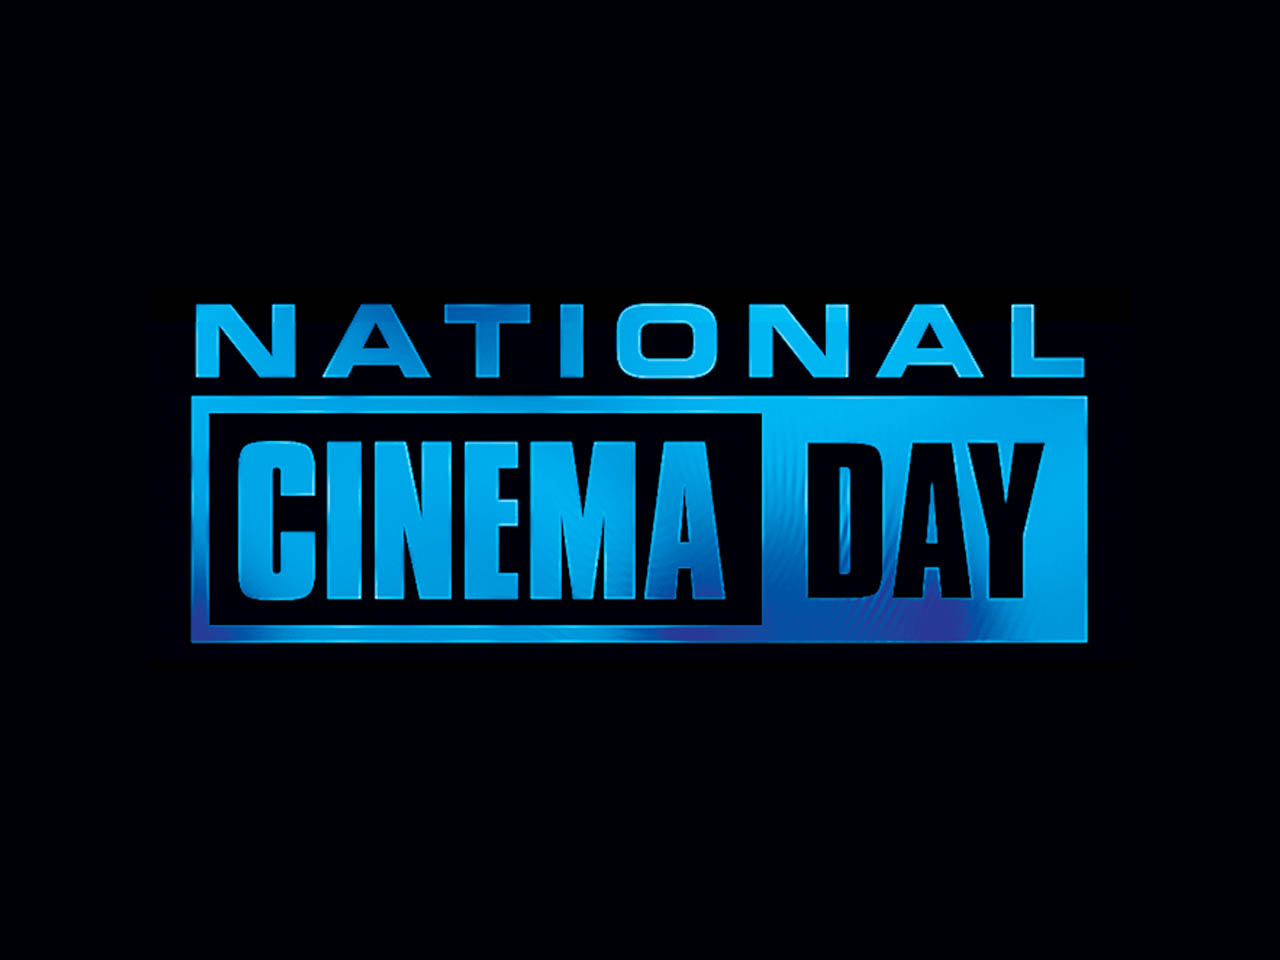 National Cinema Day taking place on Sept. 3 with 3 tickets The Nerdy